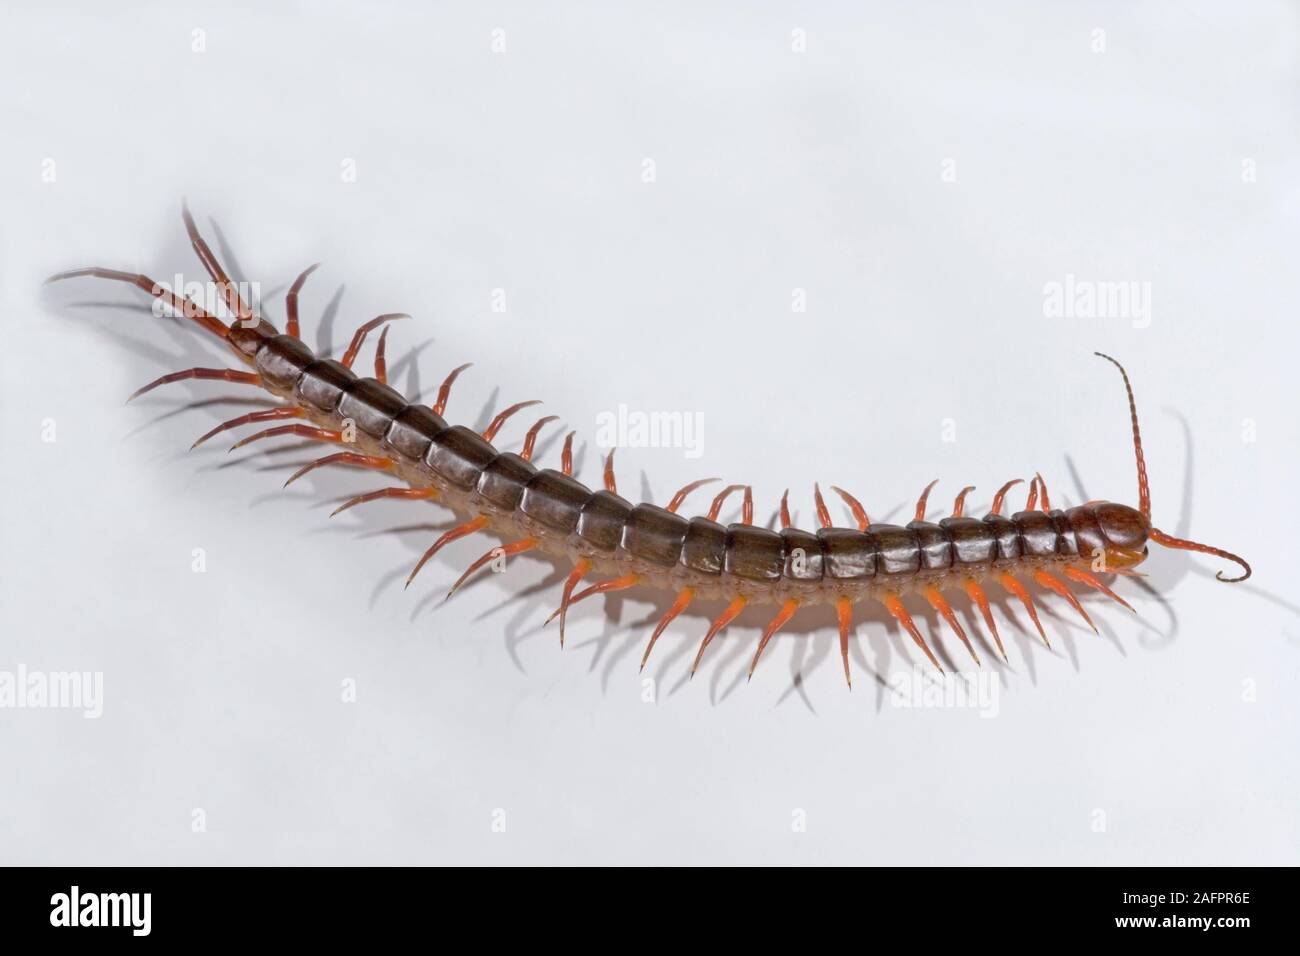 GIANT CENTIPEDE Scolopendra sp. showing legs in motion. Stock Photo